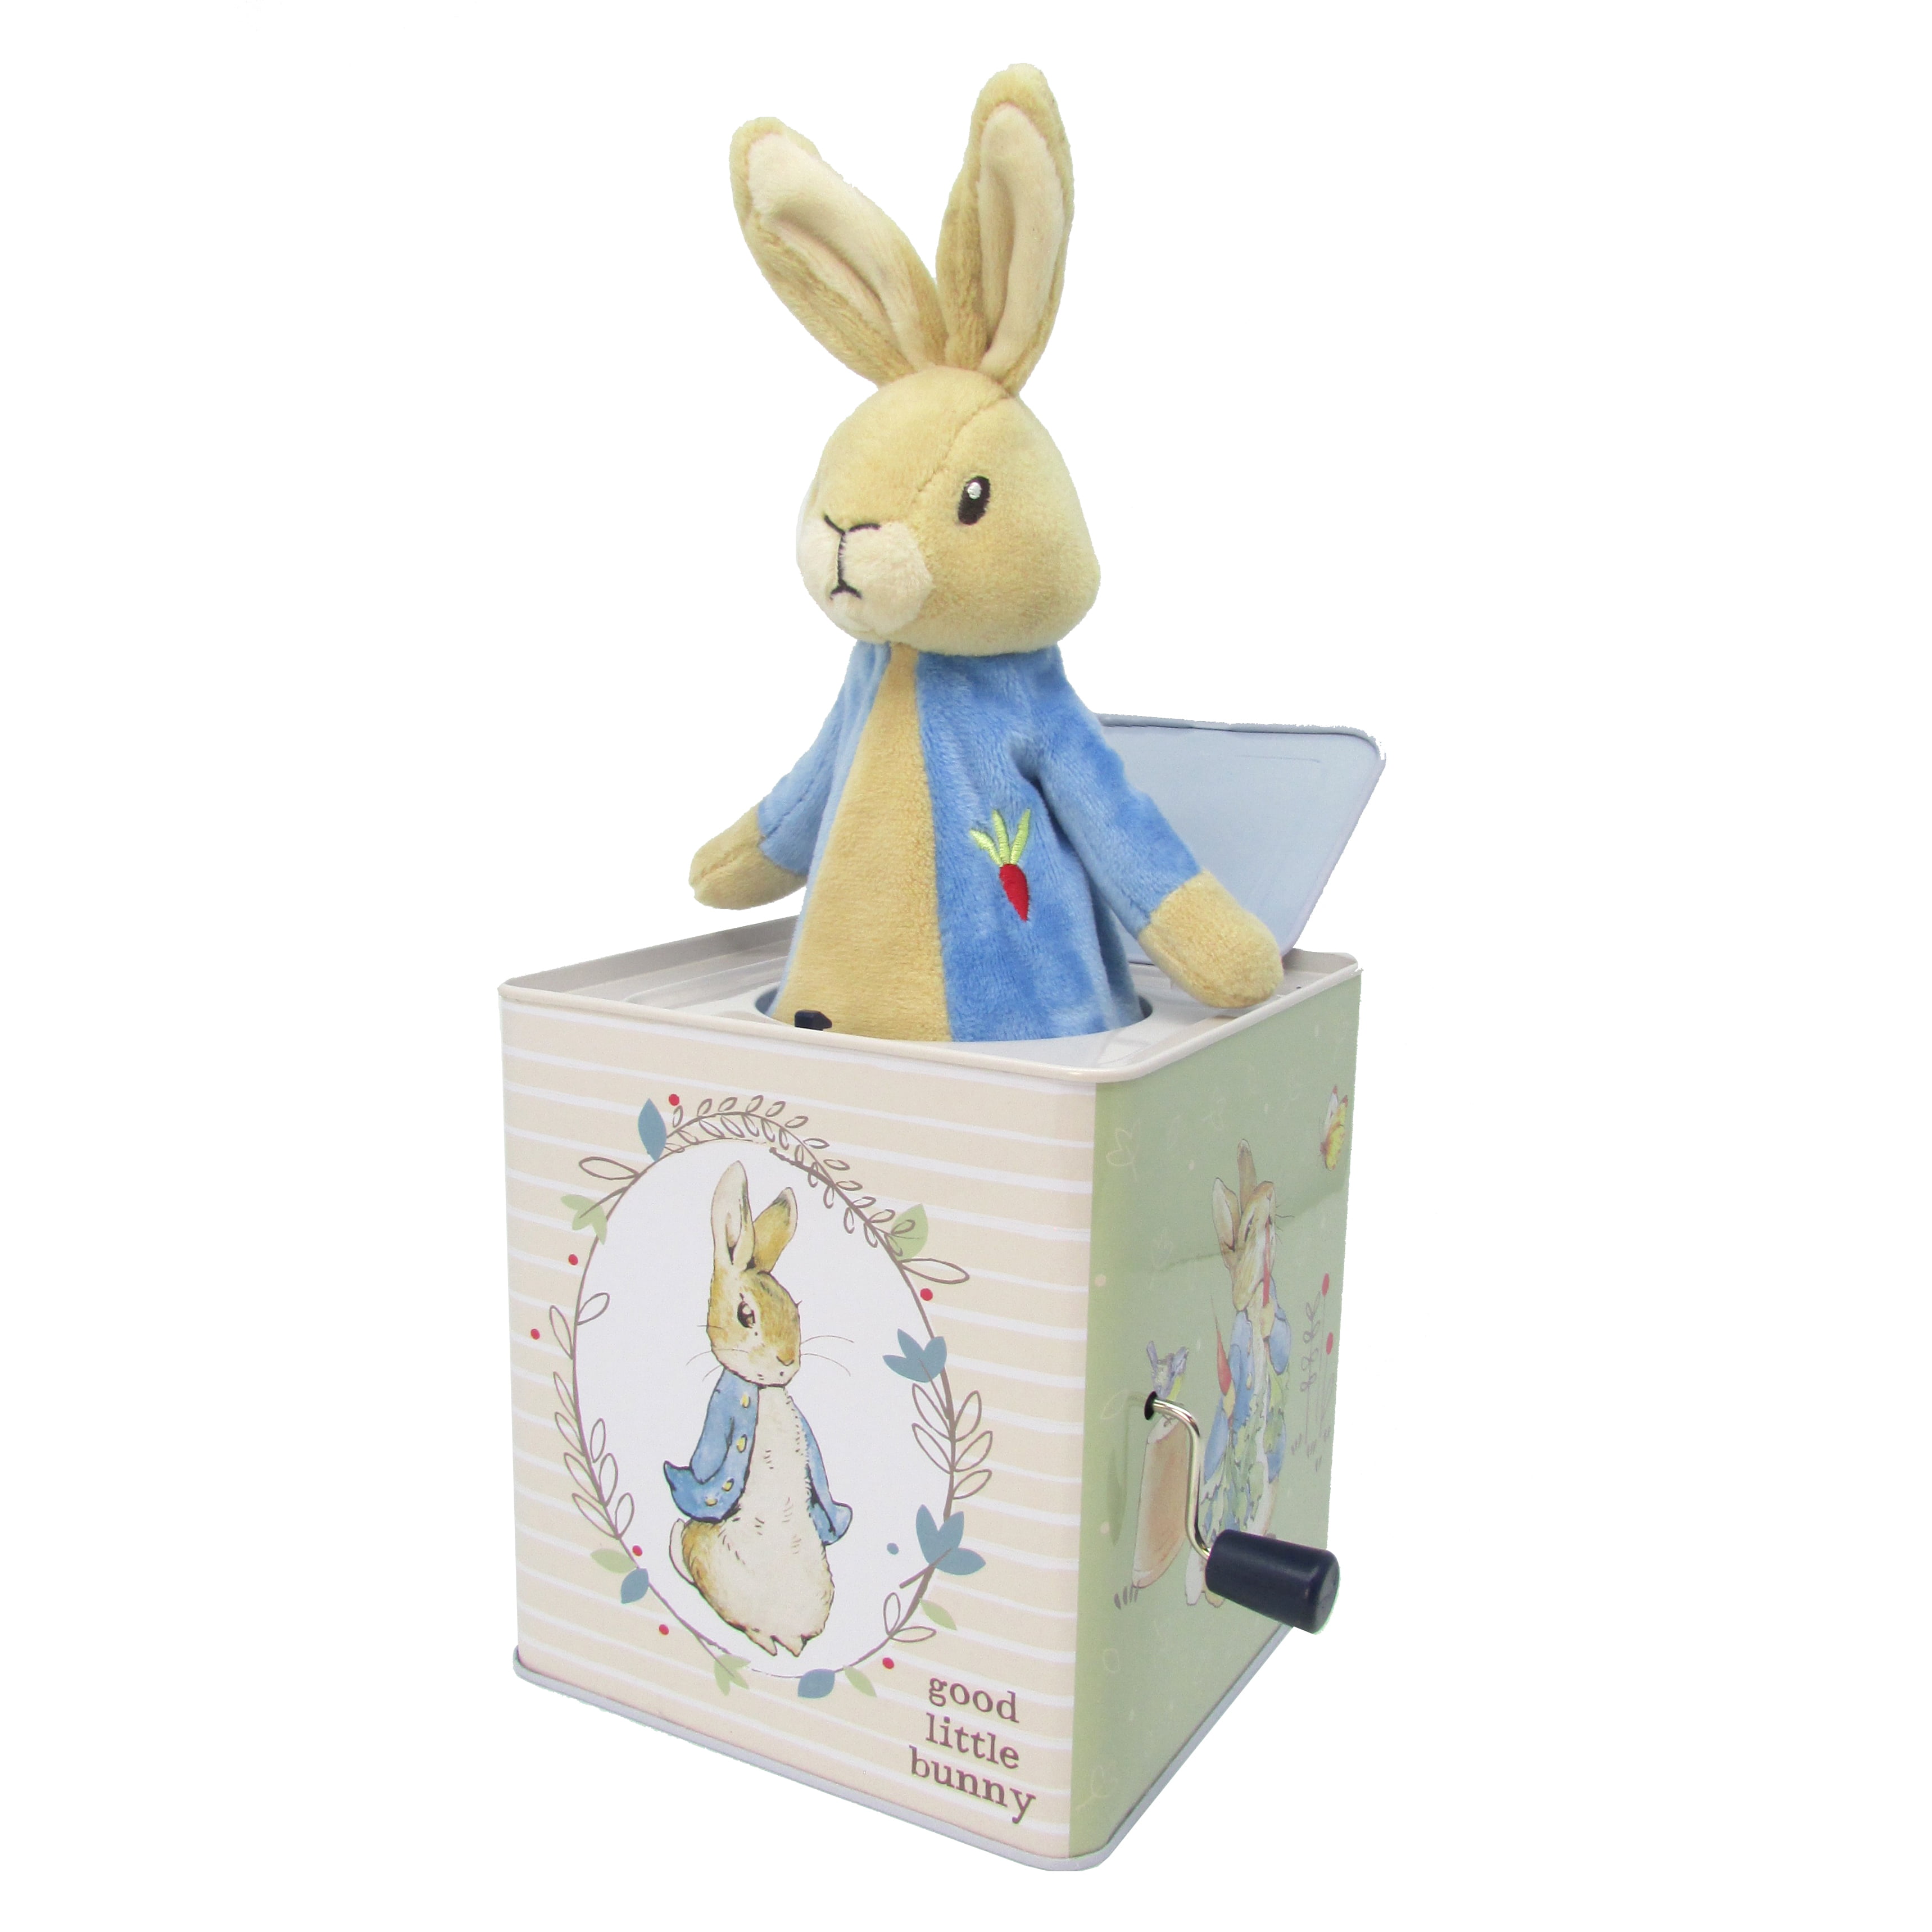 peter rabbit toy chest